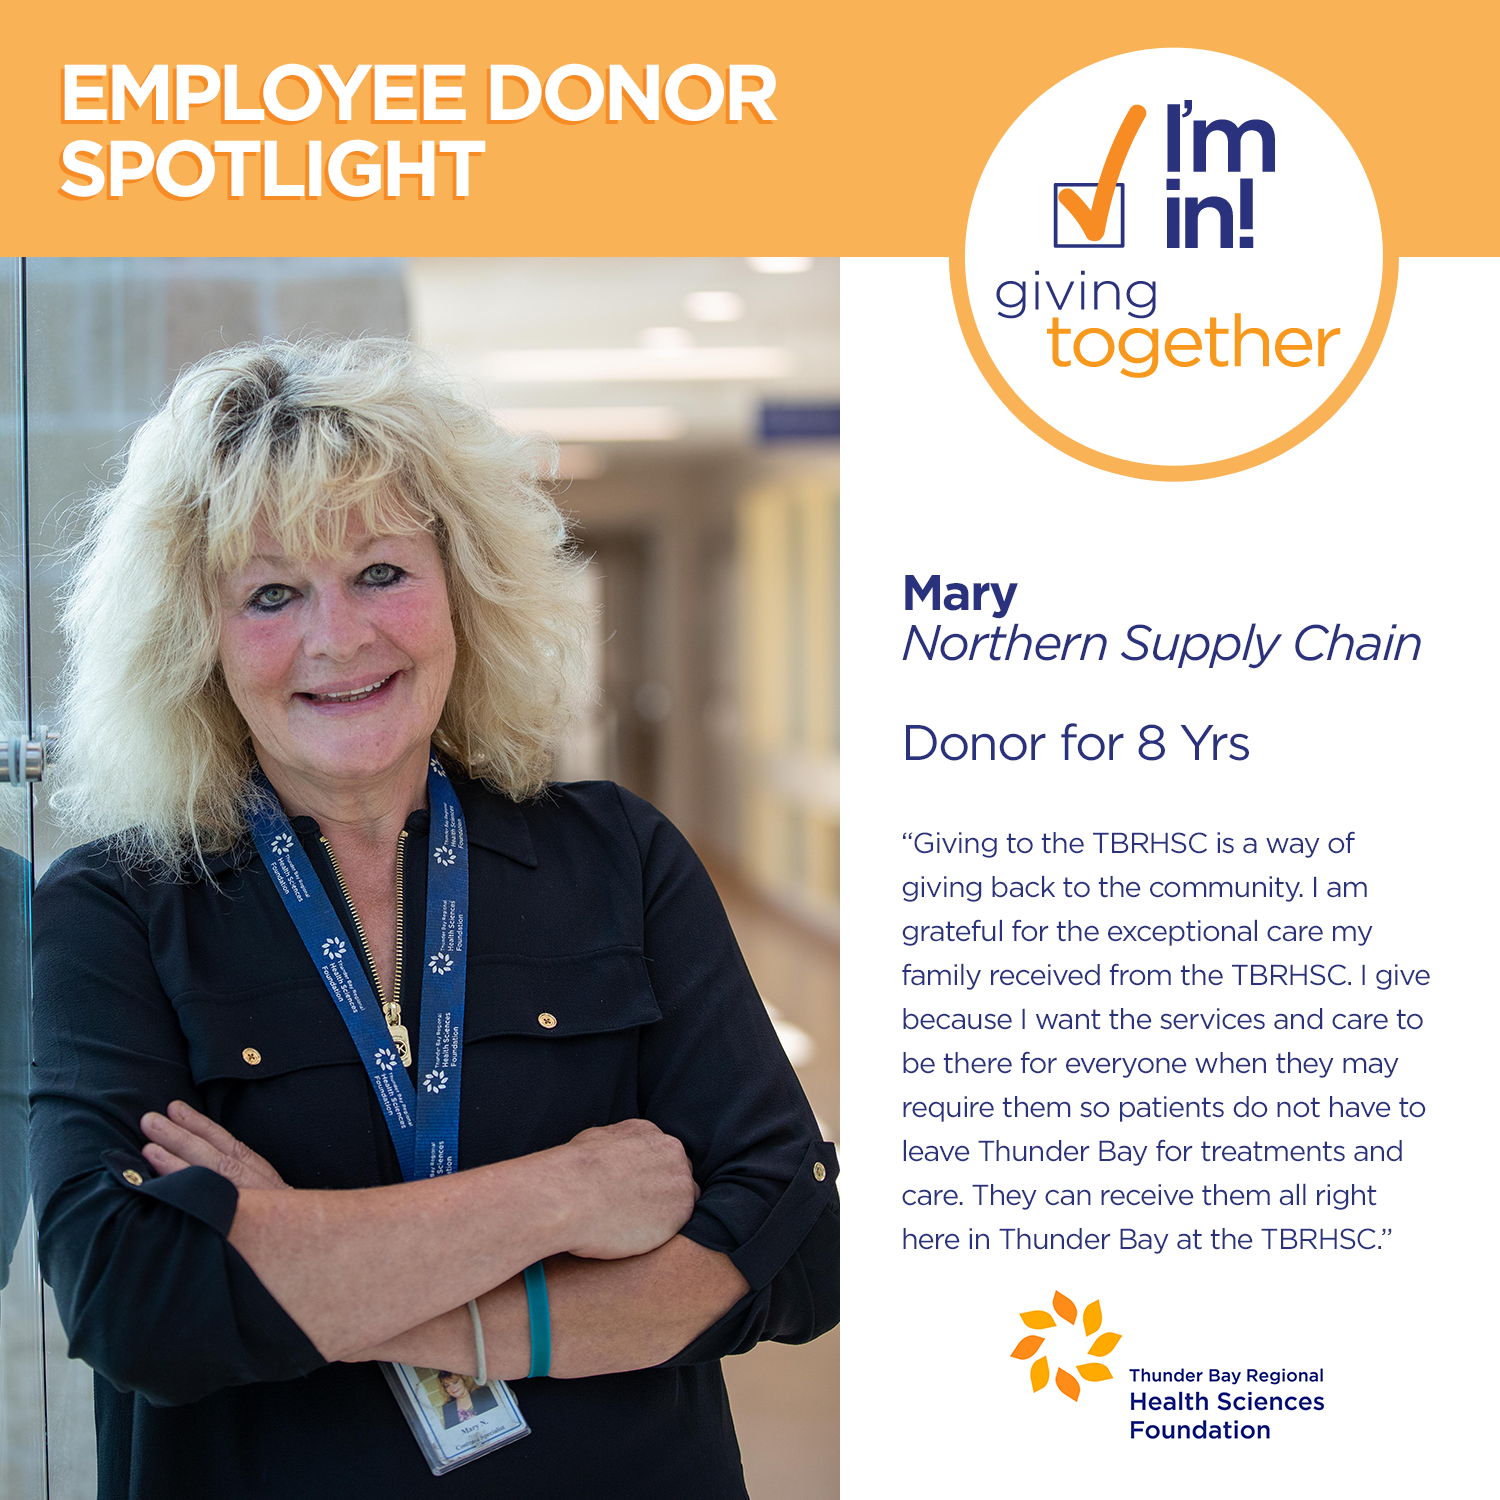 Sept 25 - Employee Donor Mary